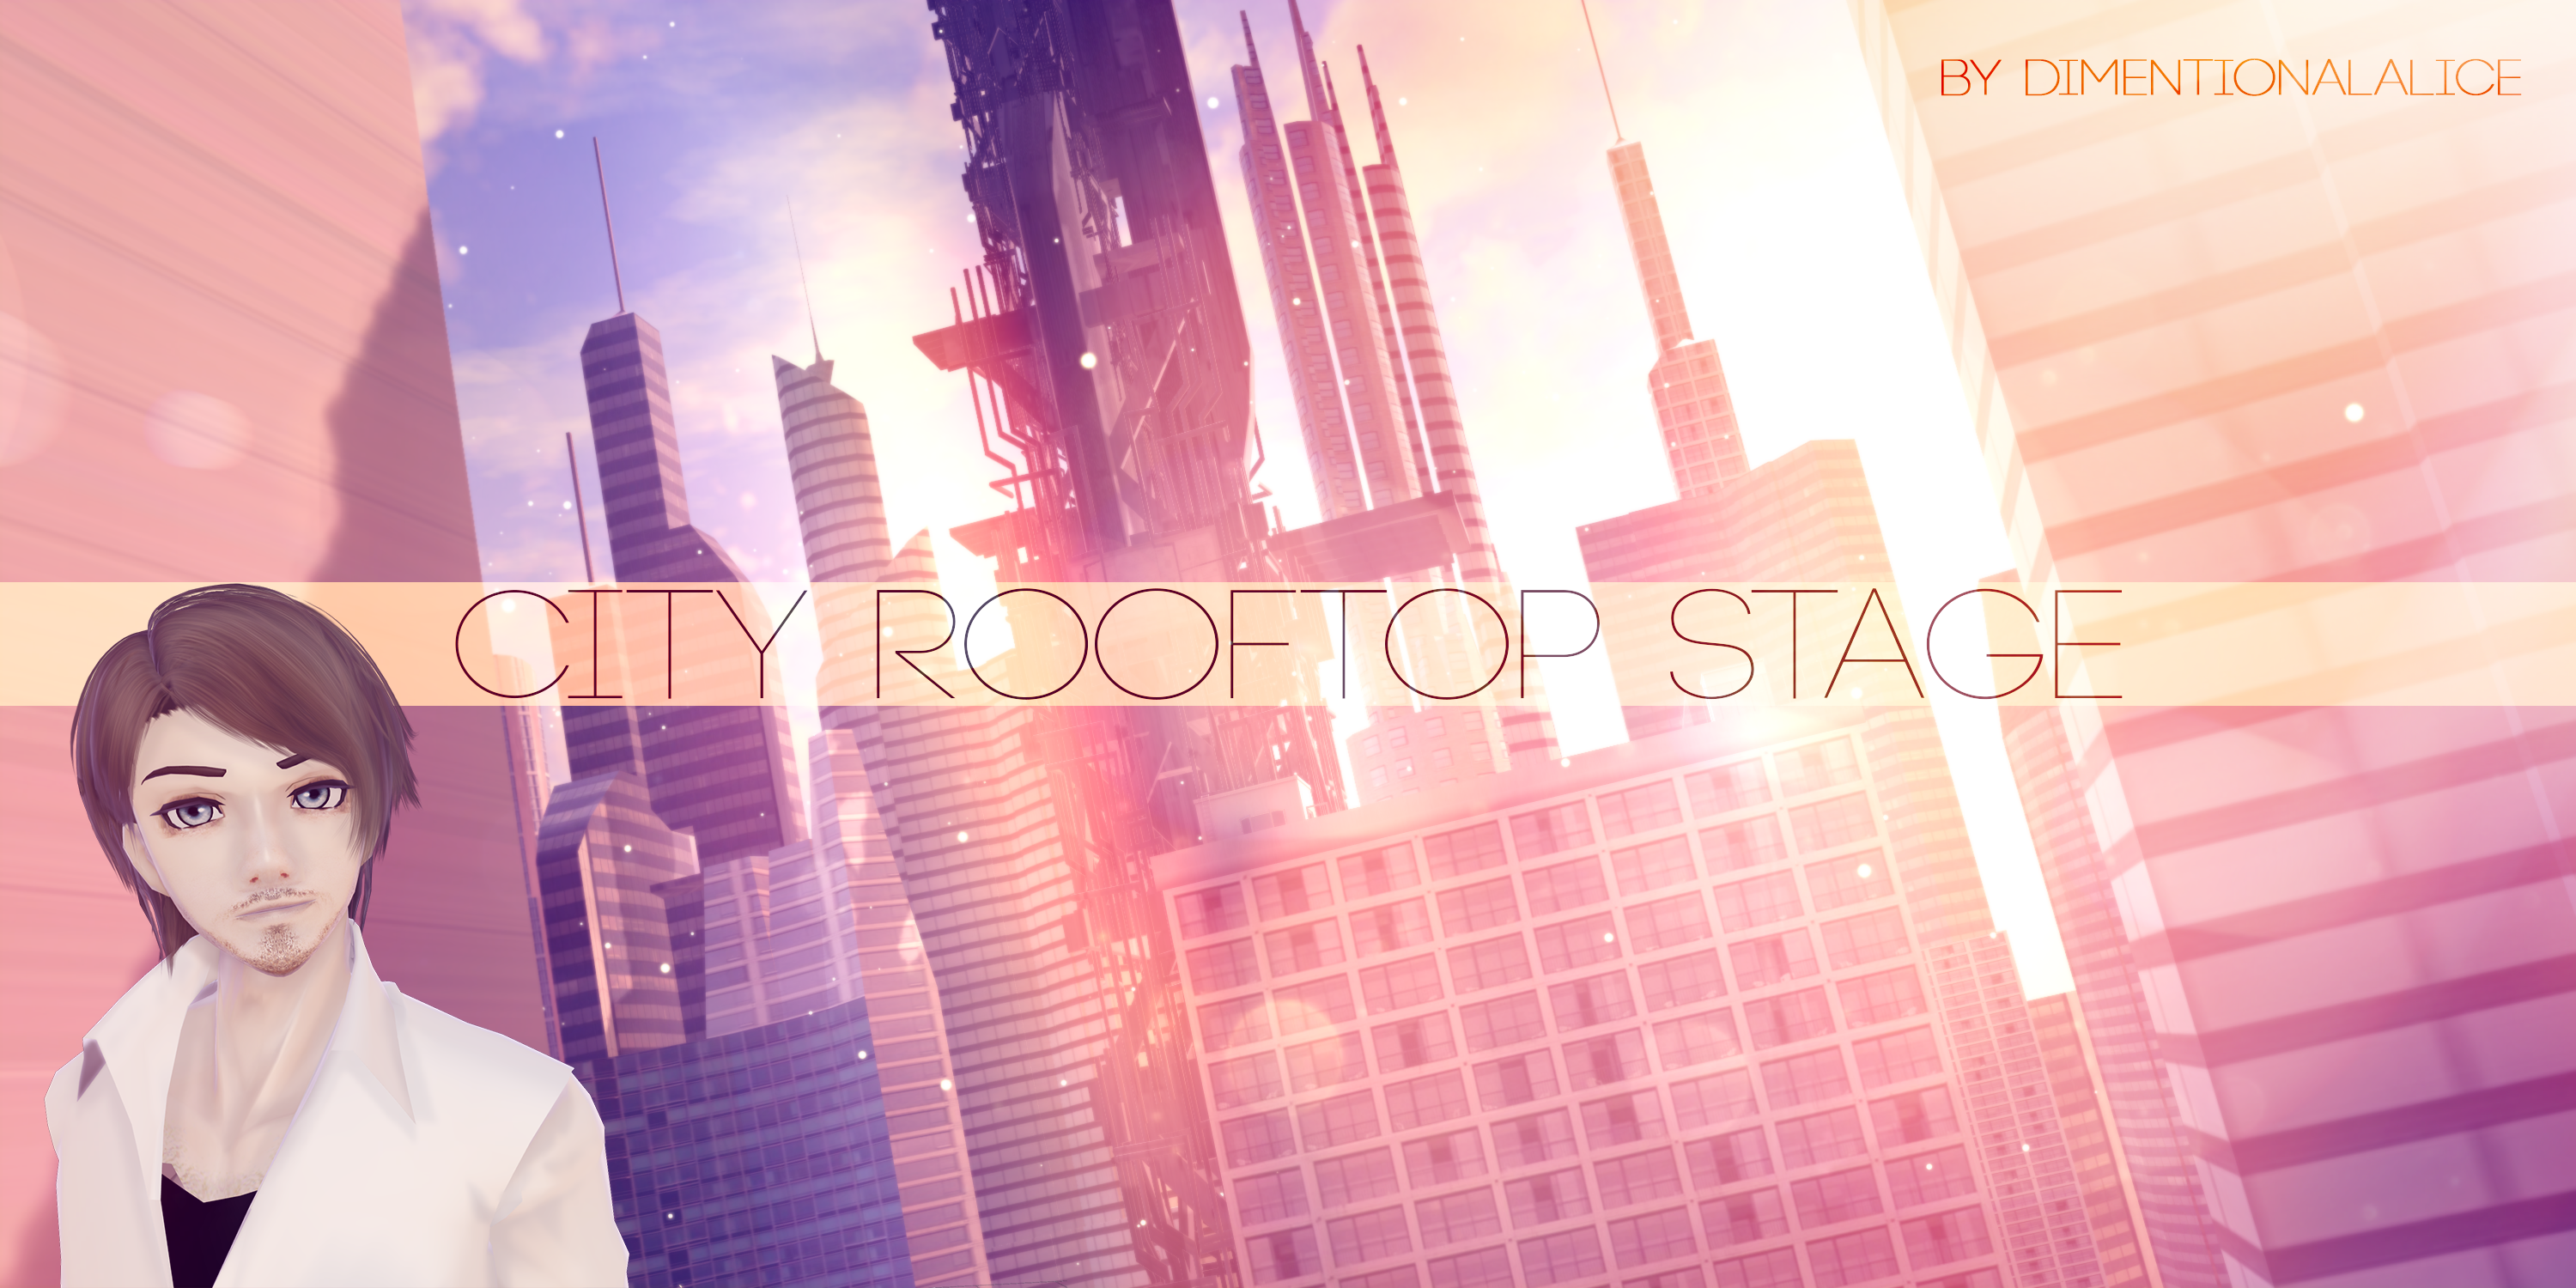 City Rooftop Stage